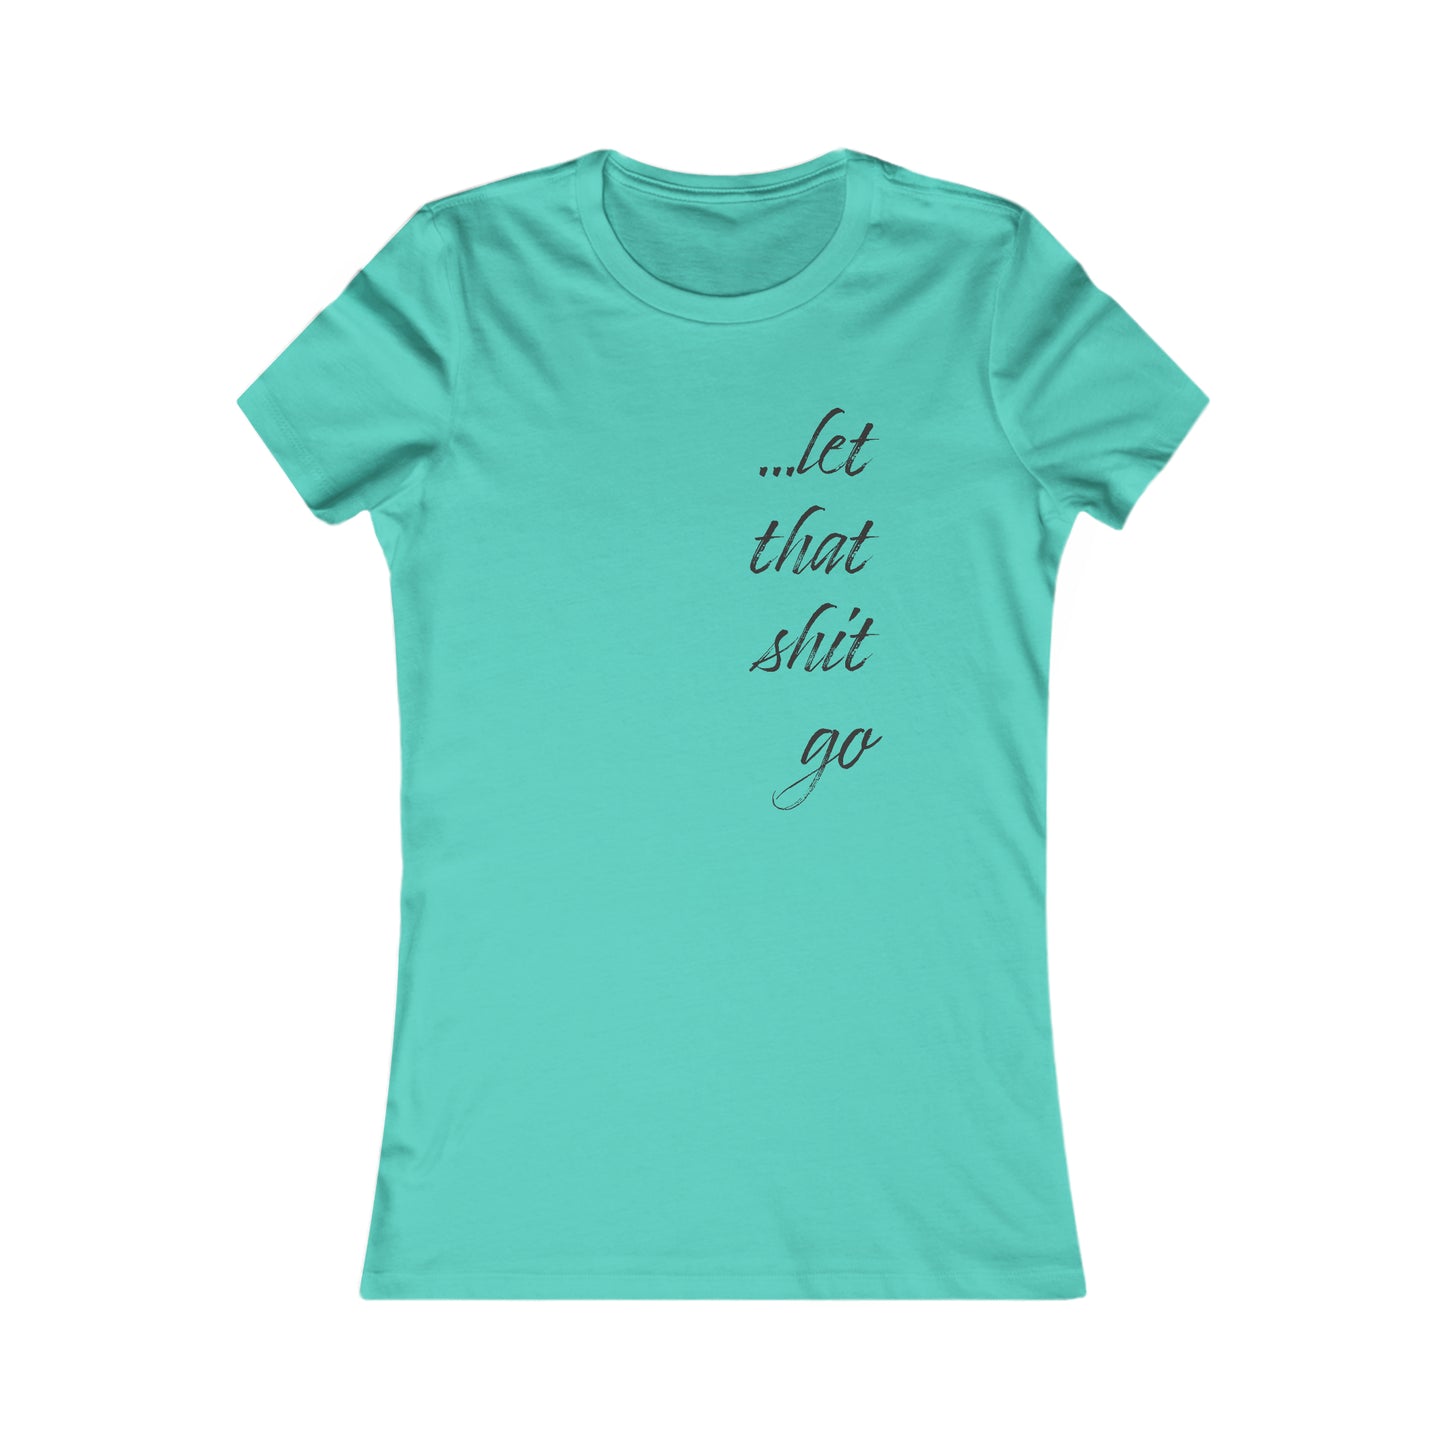 Funny Zen T-Shirt For Relax T Shirt For Let It Go TShirt For Sarcastic Yoga Shirt For Silly Gift For Her